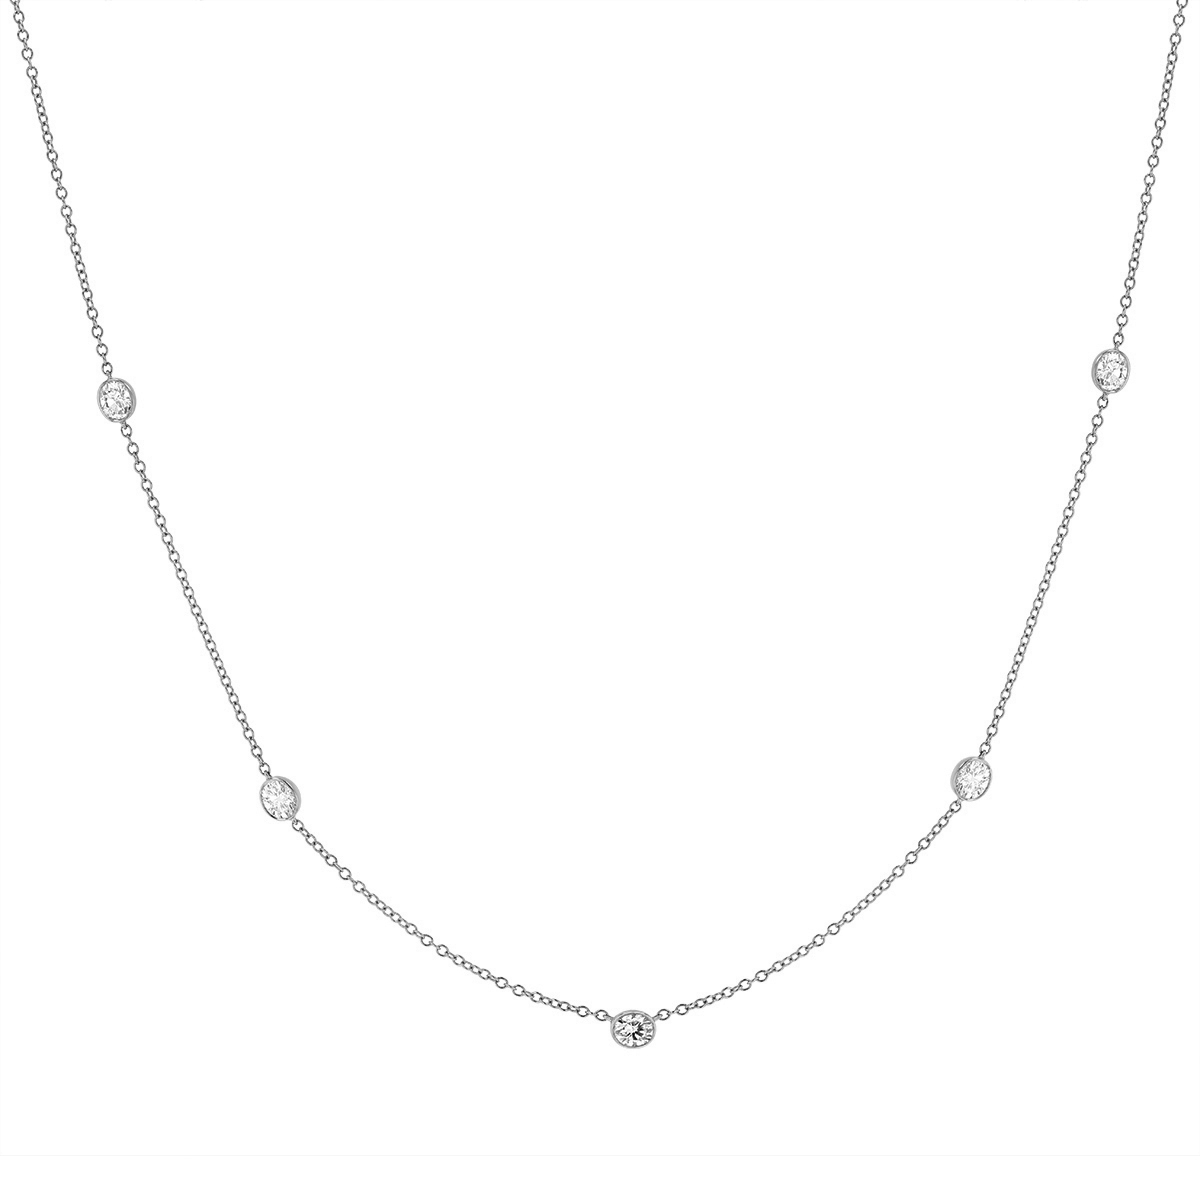 Borsheims Signature Oval Diamond 5 Station Necklace in White Gold ...